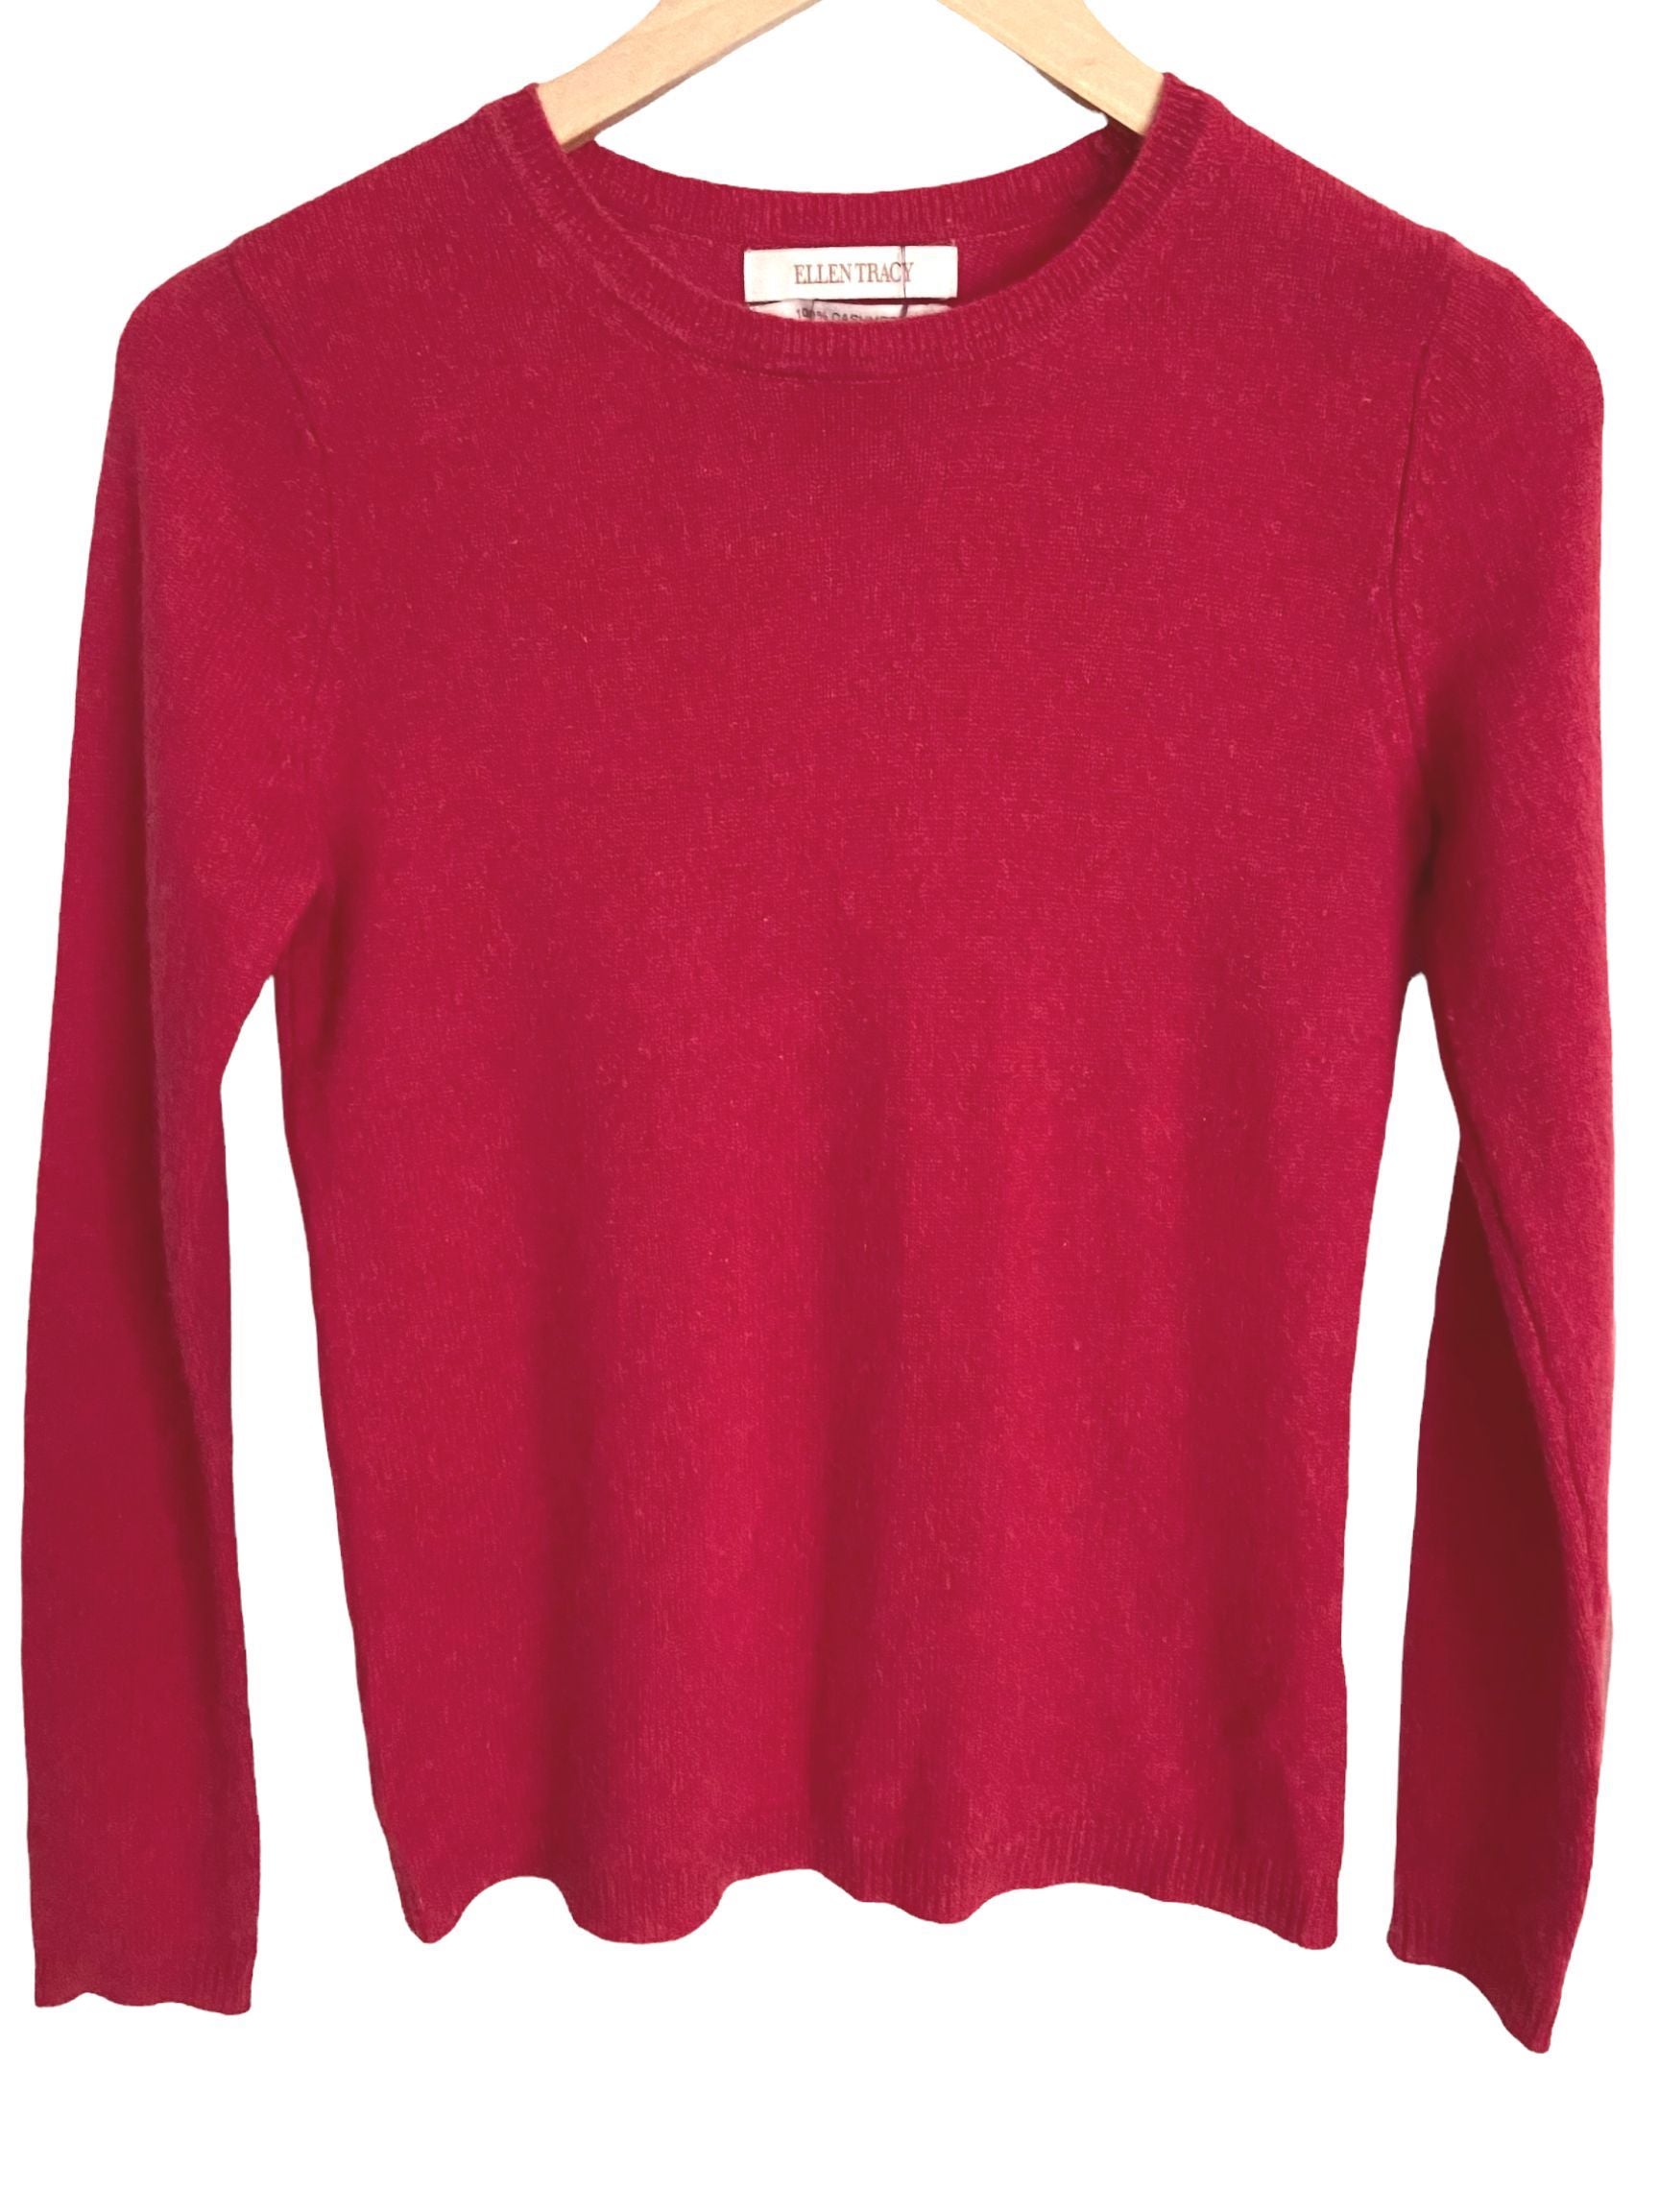 Cool Winter ELLEN TRACY red cashmere crewneck sweater